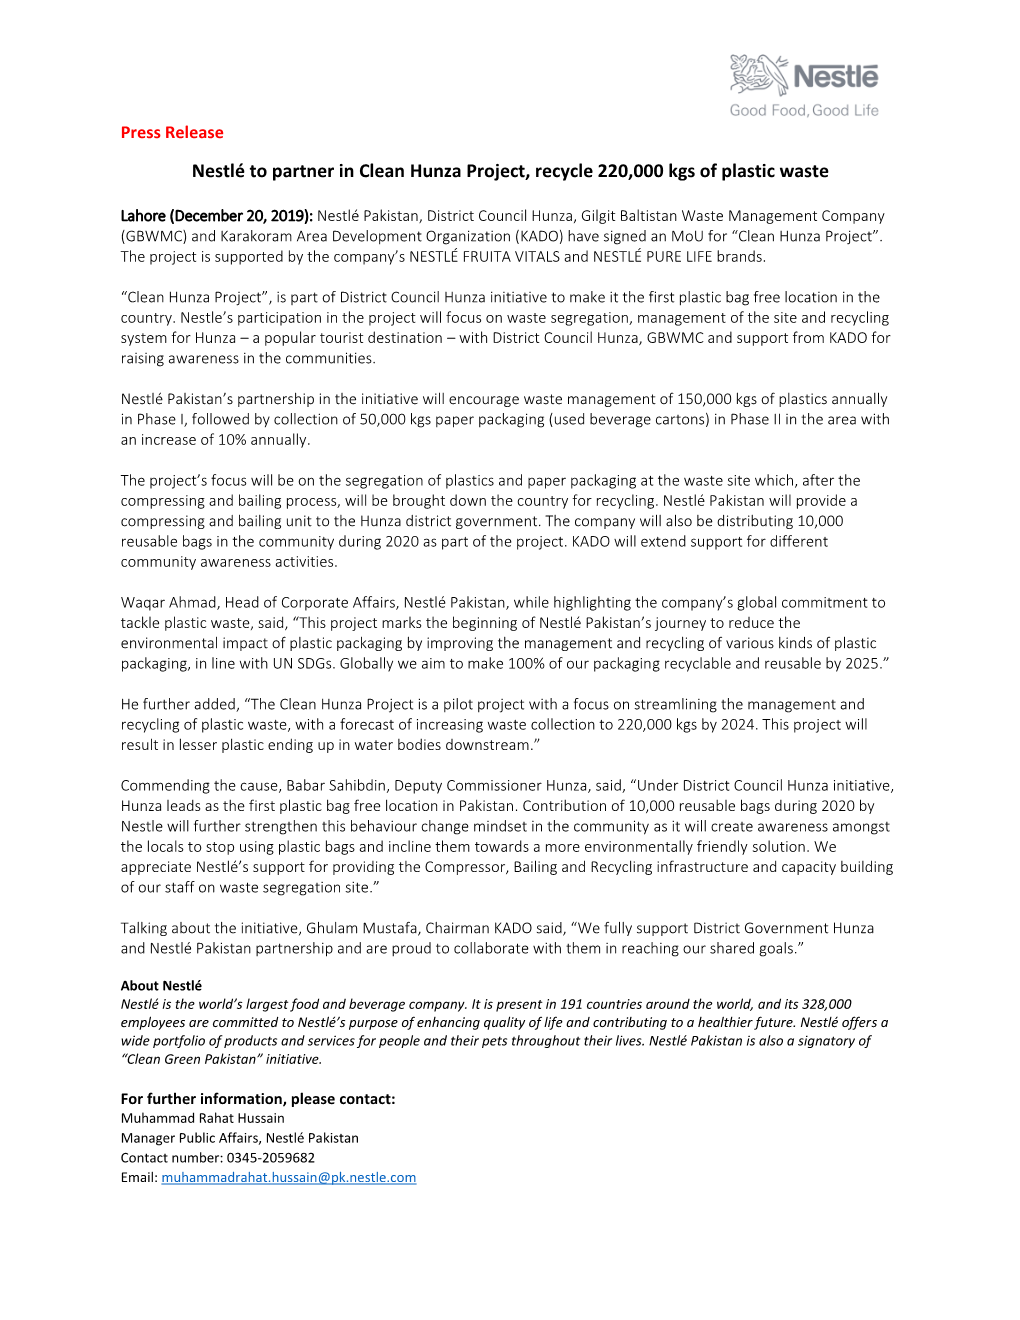 Press Release Nestlé to Partner in Clean Hunza Project, Recycle 220,000 Kgs of Plastic Waste